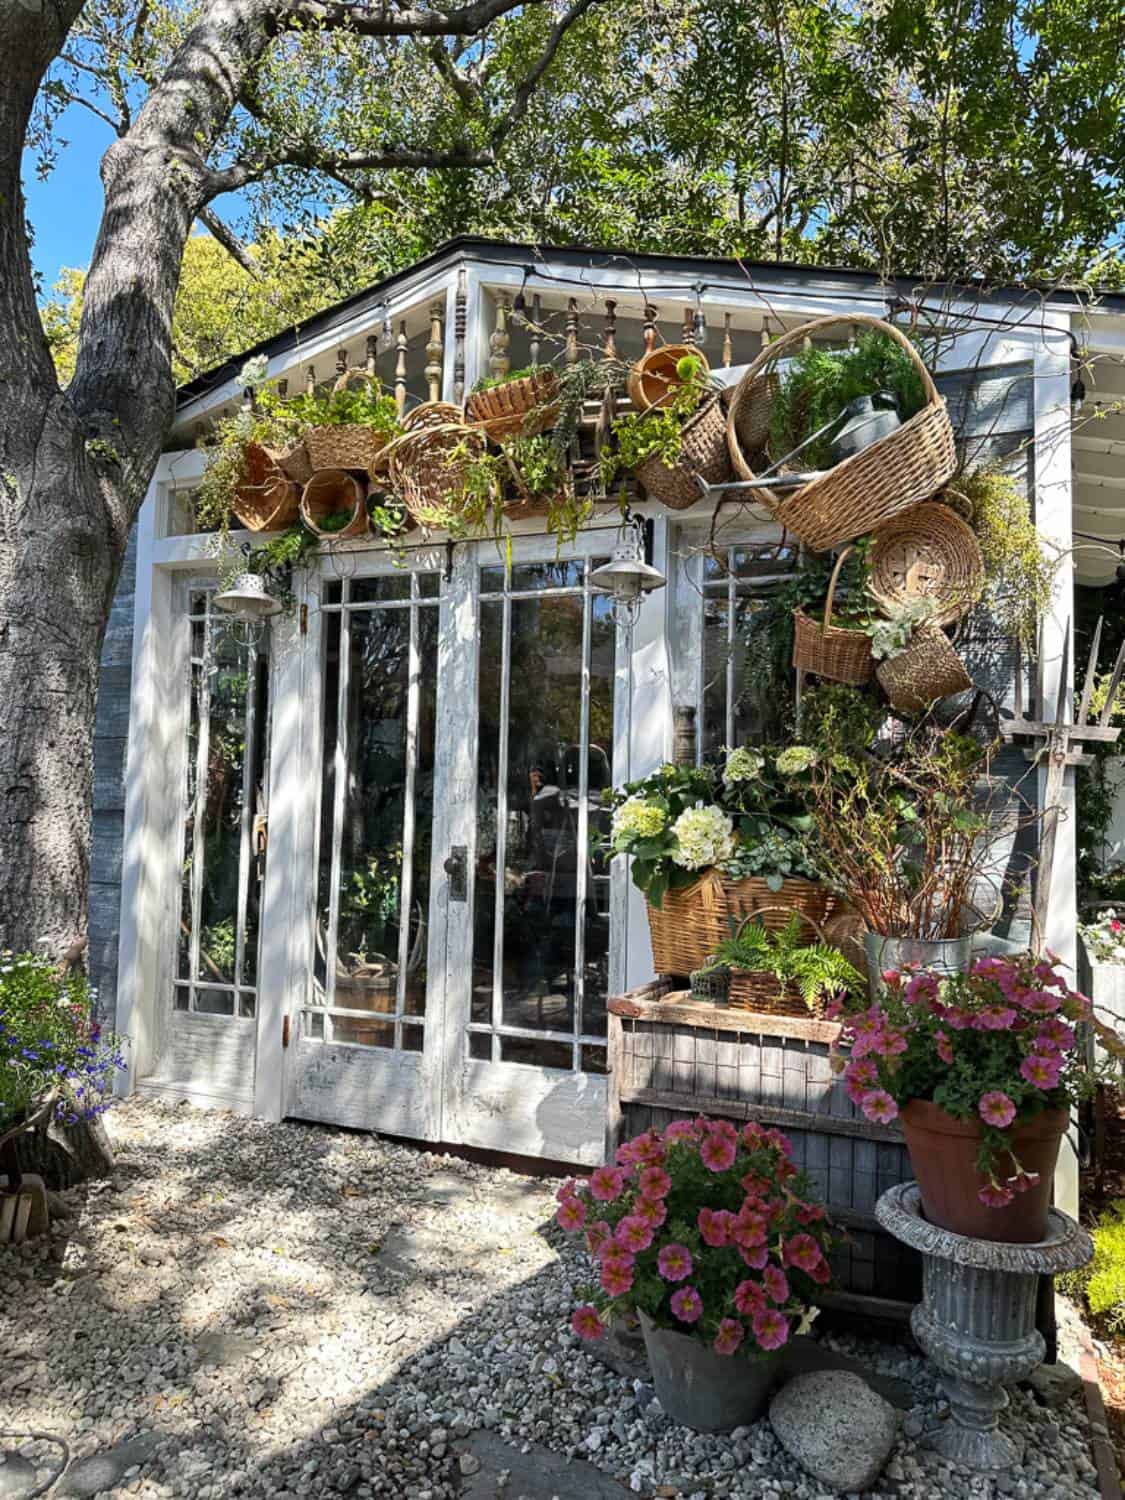 Full side view of summer She Shed with basket arch decor and planters with flowers